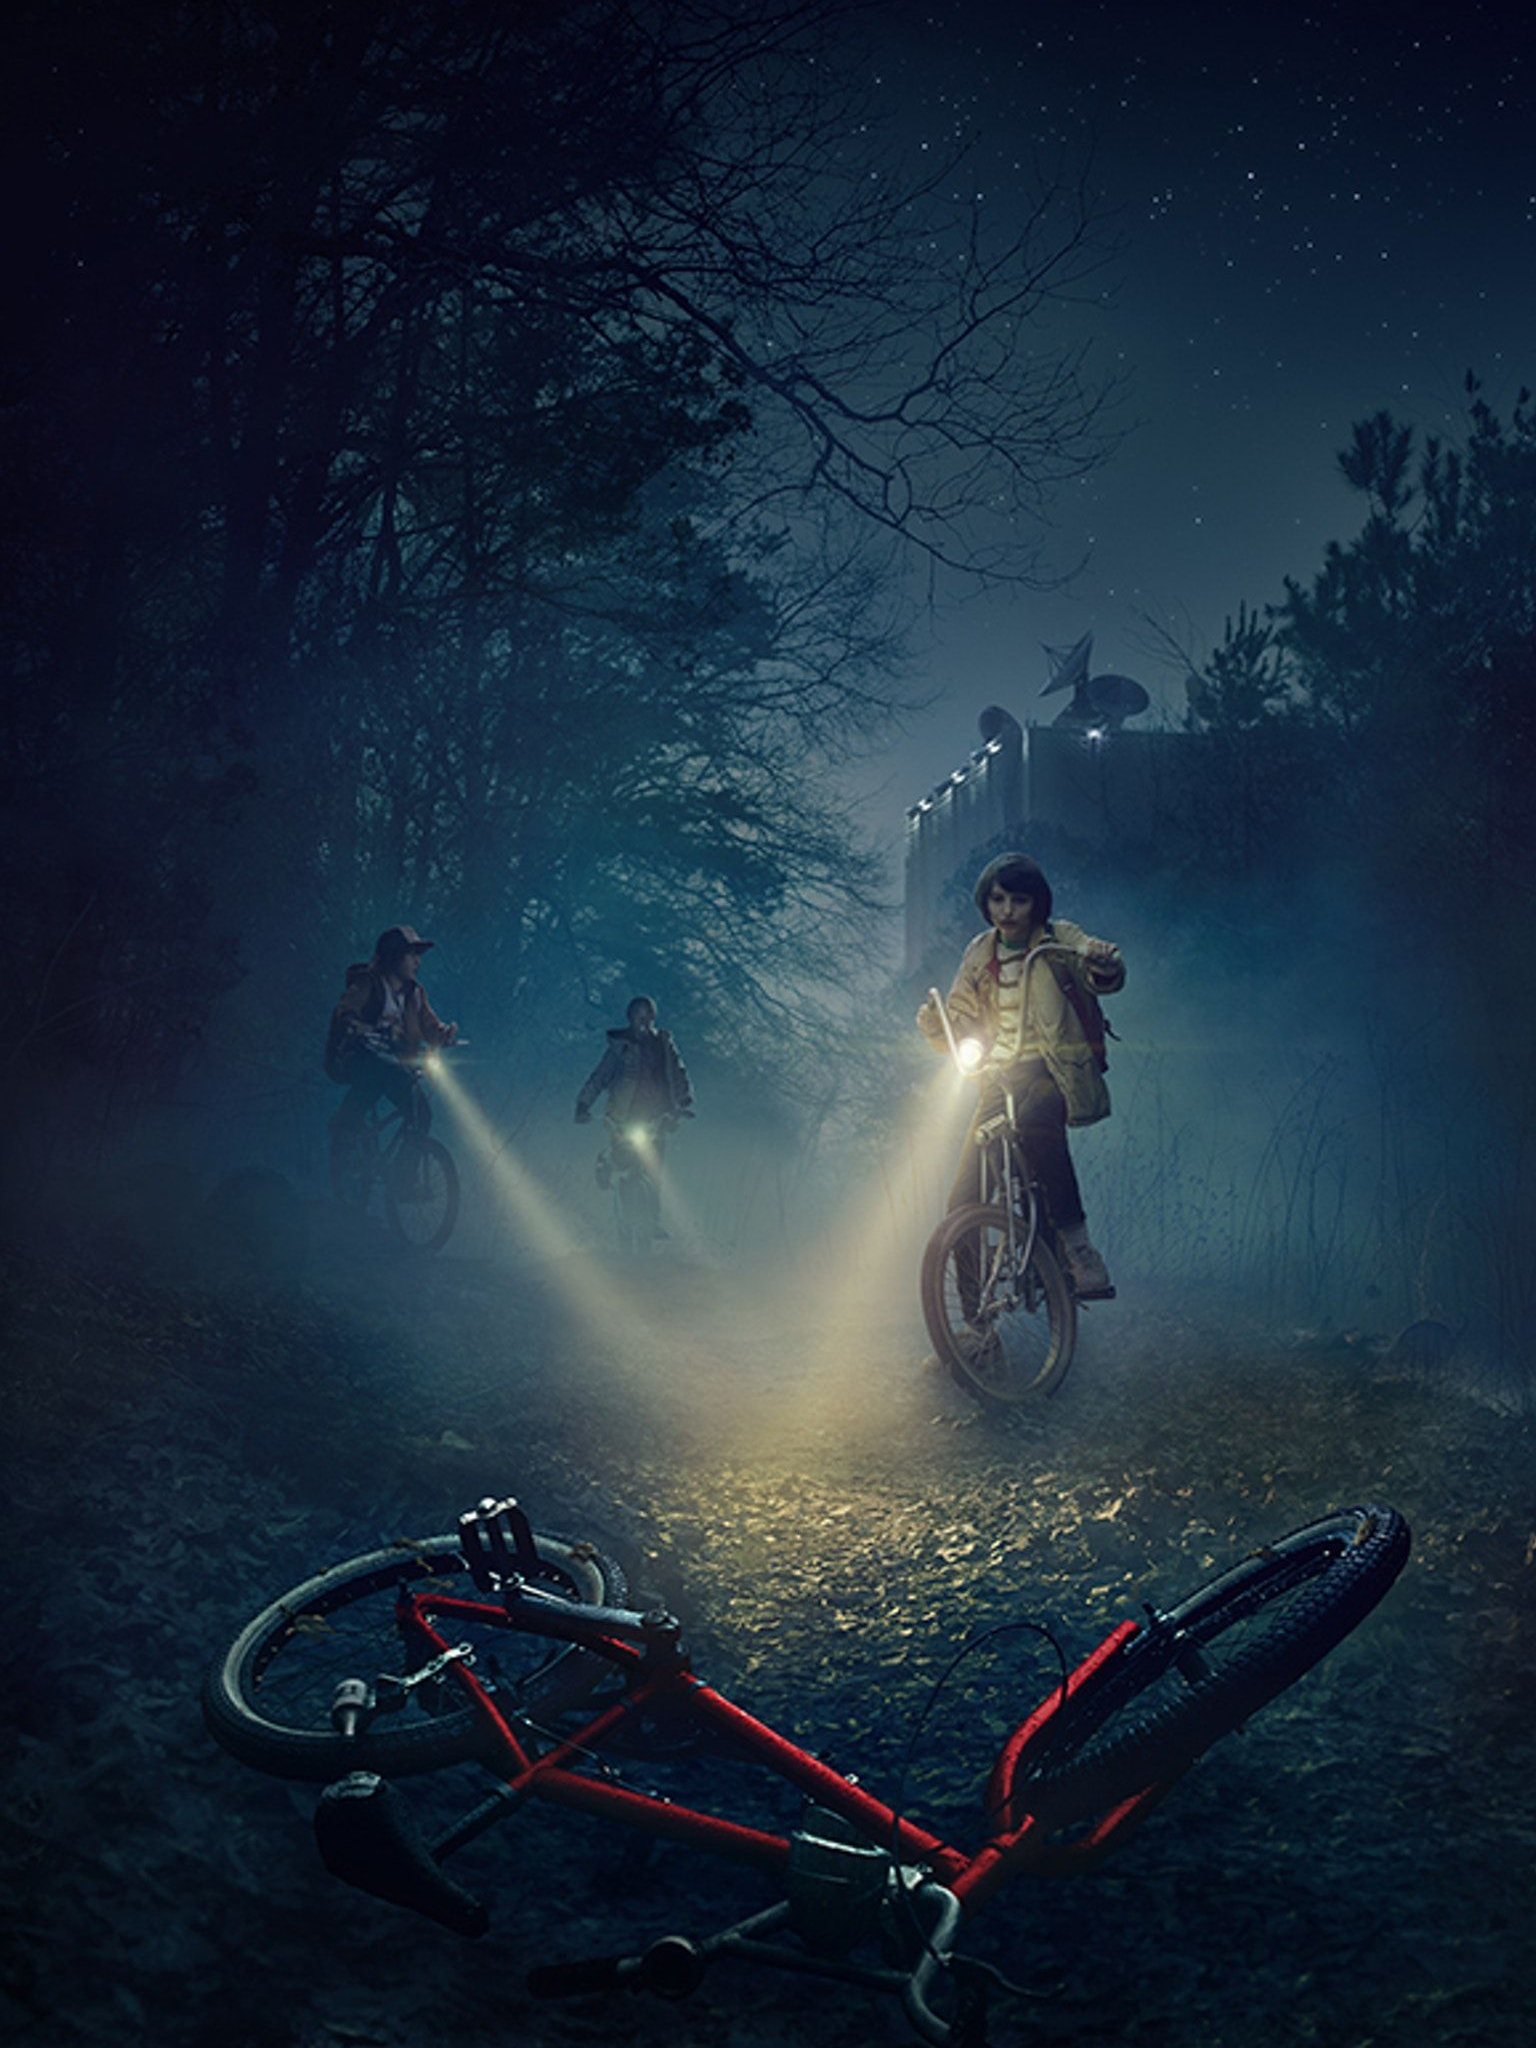 Free download Stranger Things Phone Wallpaper in 2019 To the Upside Down [1536x2732] for your Desktop, Mobile & Tablet. Explore The Upside Movie Wallpaper. The Upside Movie Wallpaper, Home